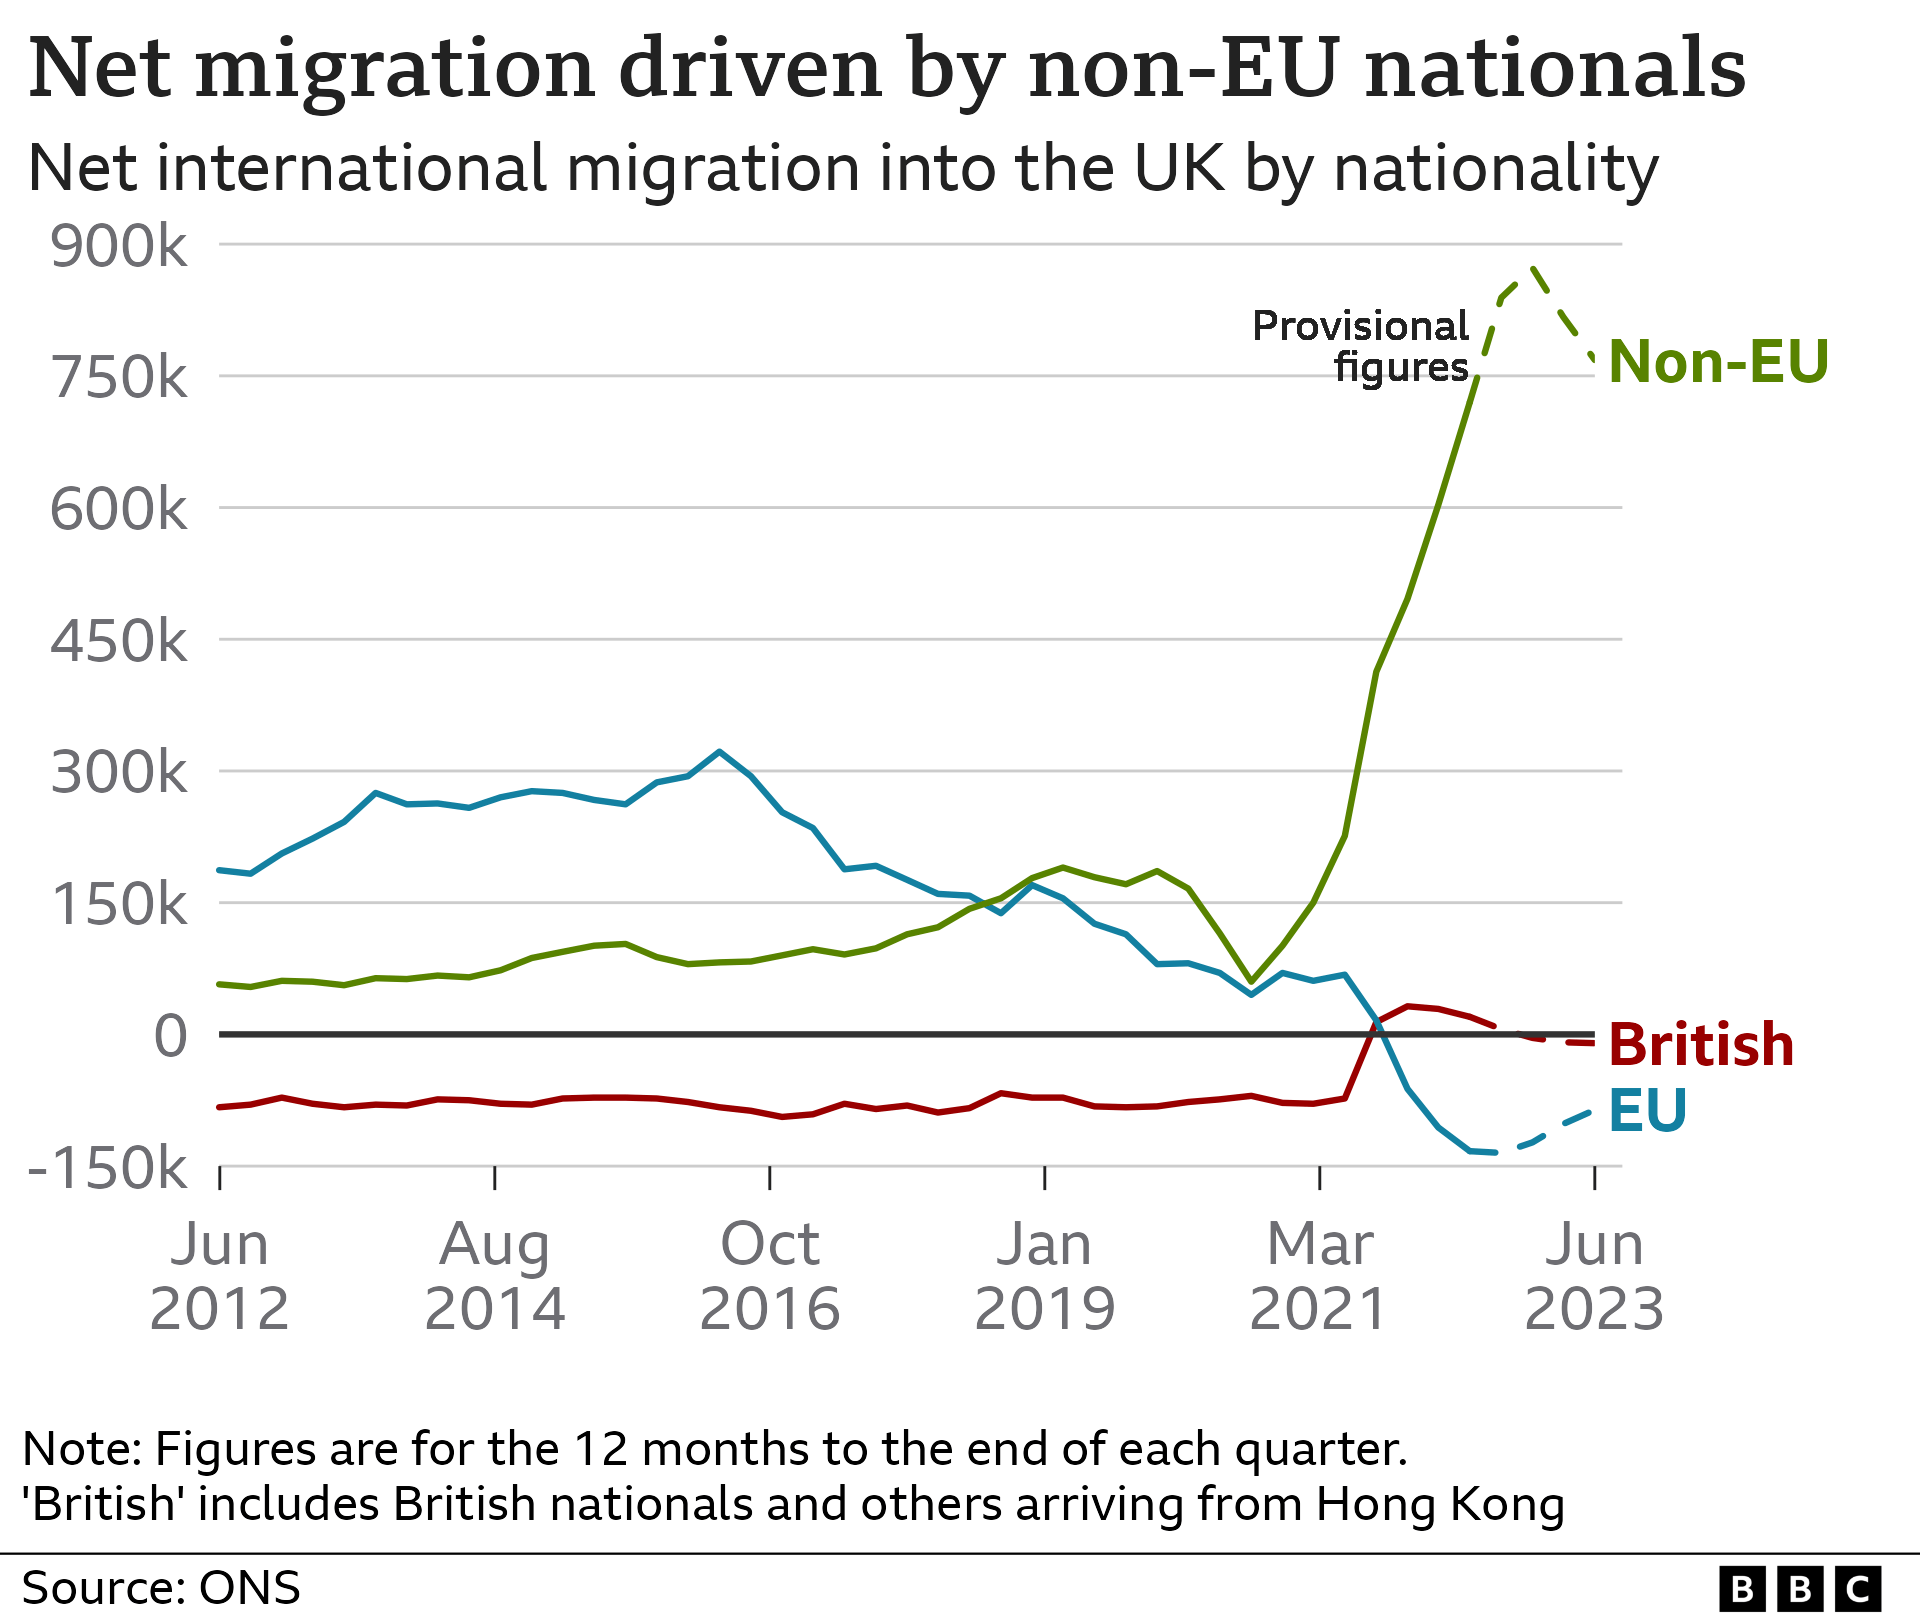 Chart showing net migration from EU, non-EU and British people. It shows that non-EU migration is driving net migration.